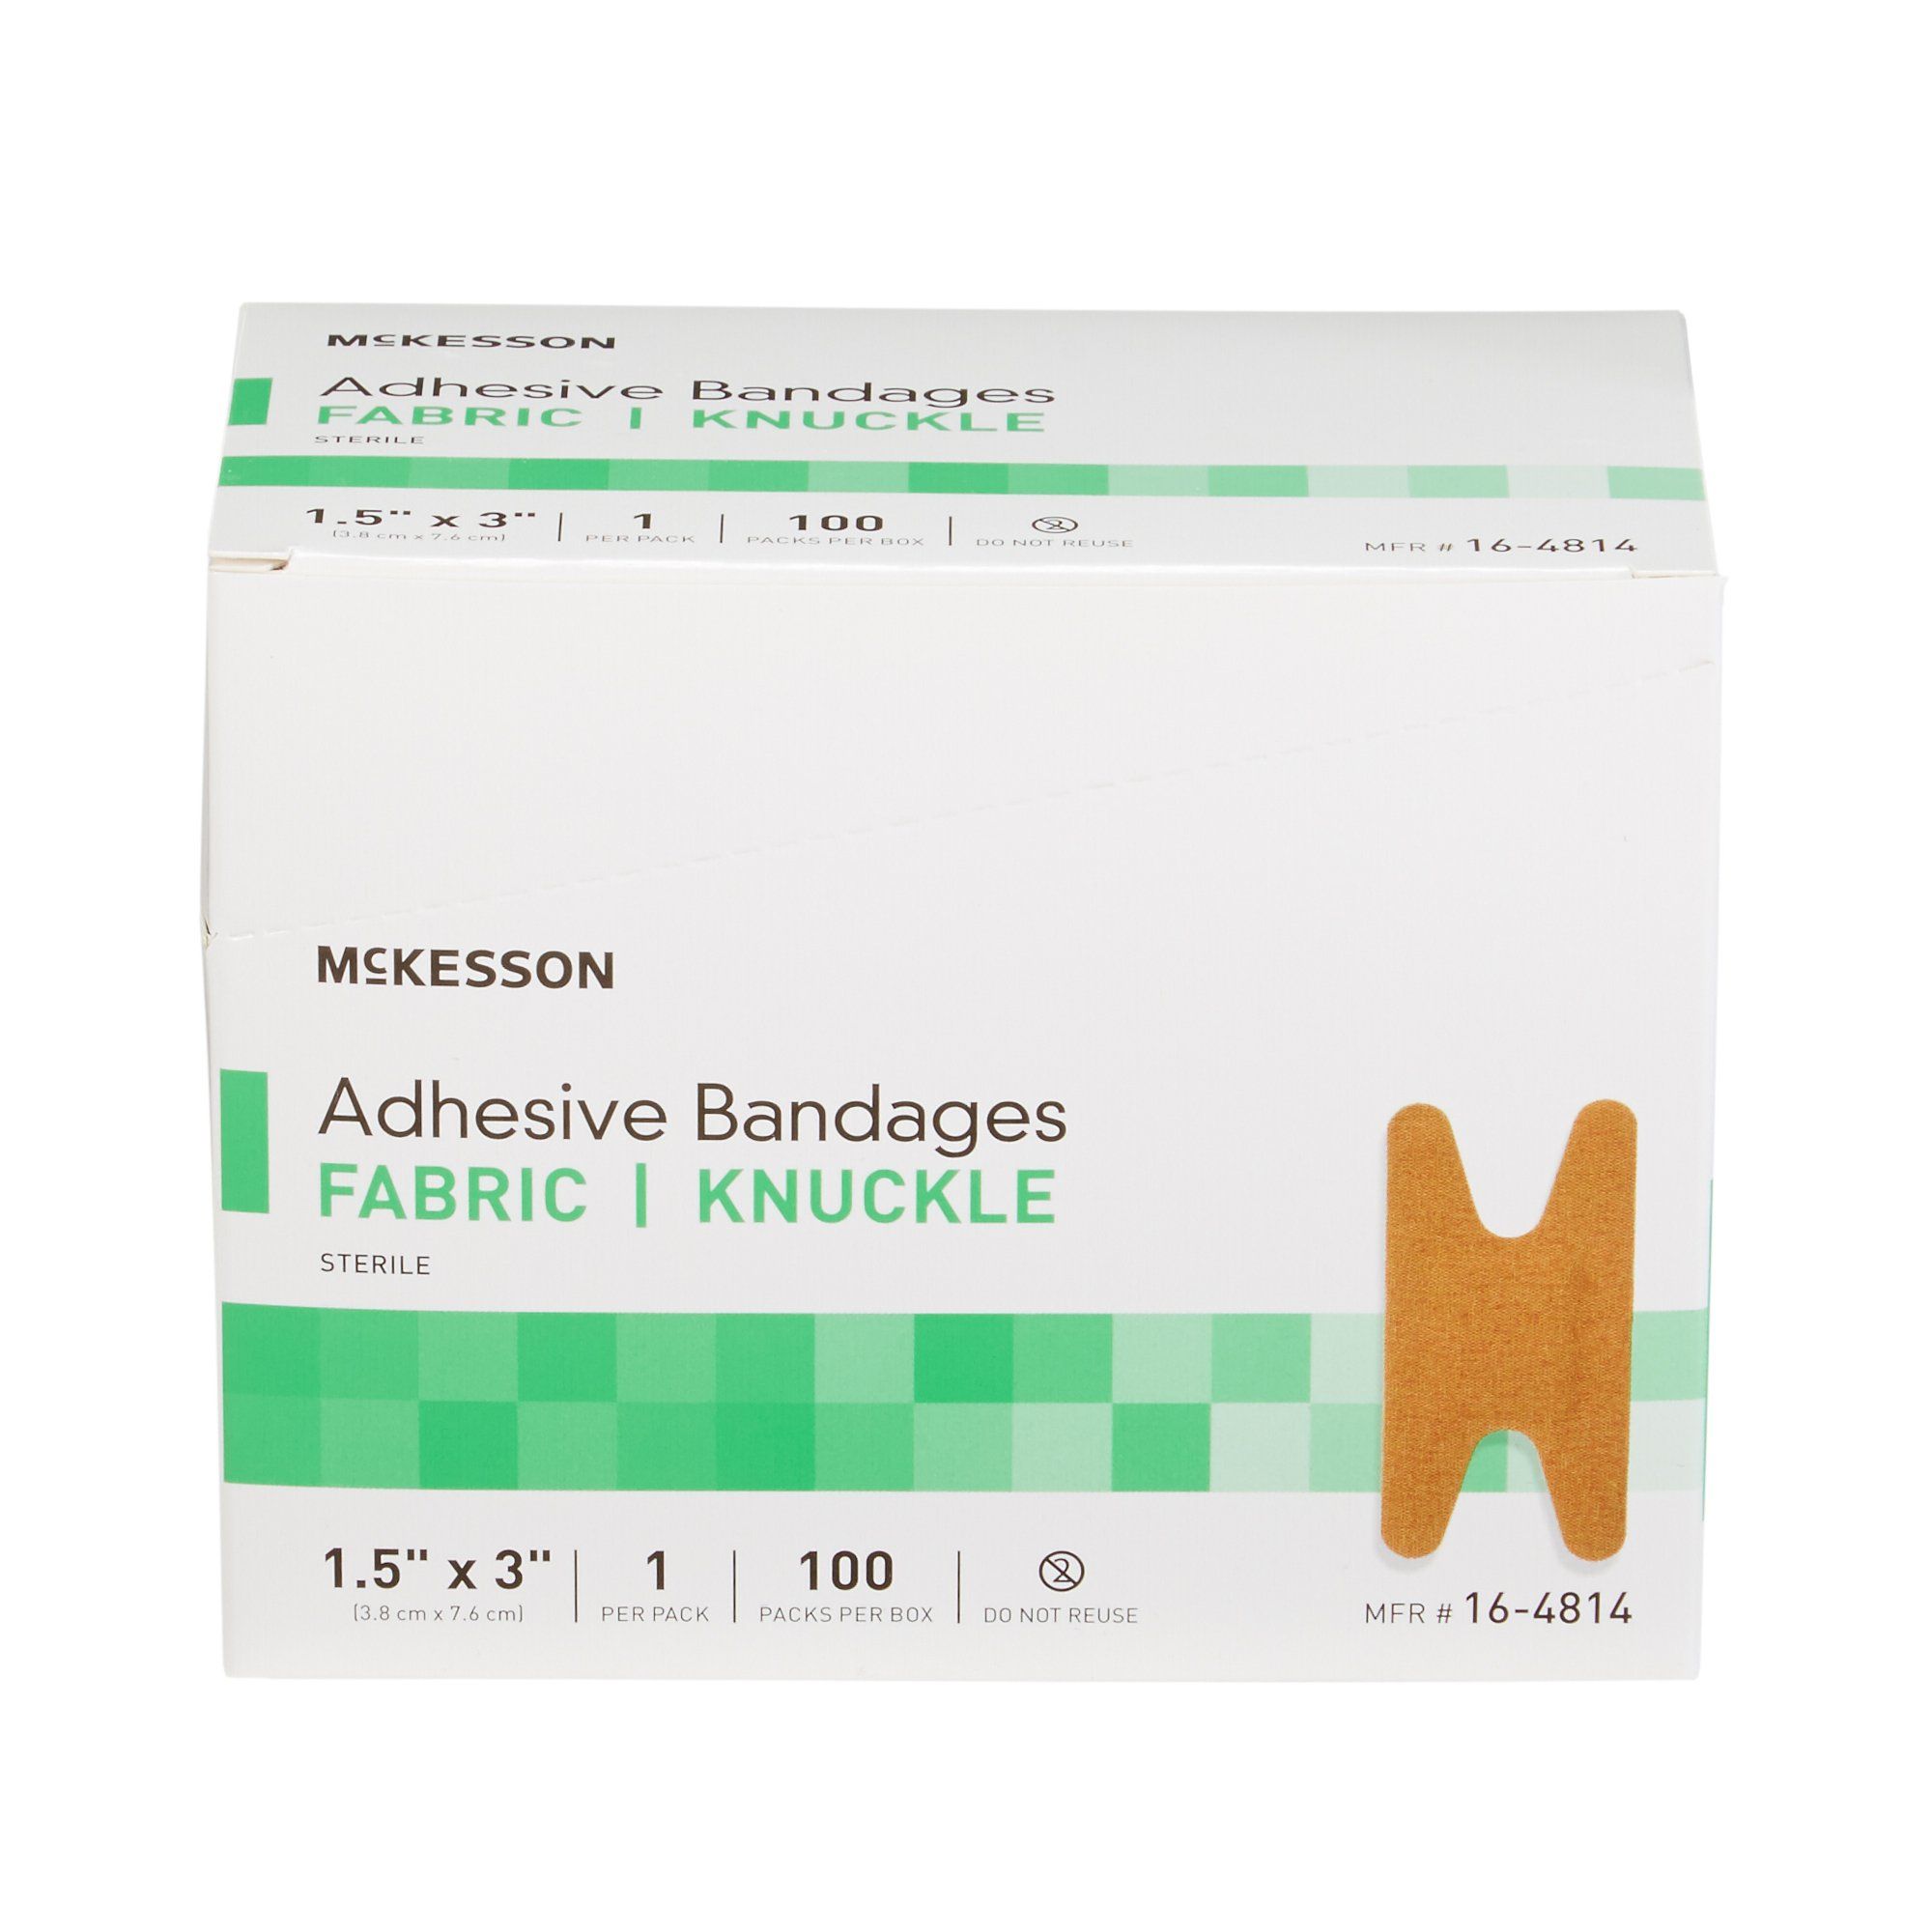 McKesson Adhesive Bandages Fabric Knuckle, 1.5" x 3" - 100 ct